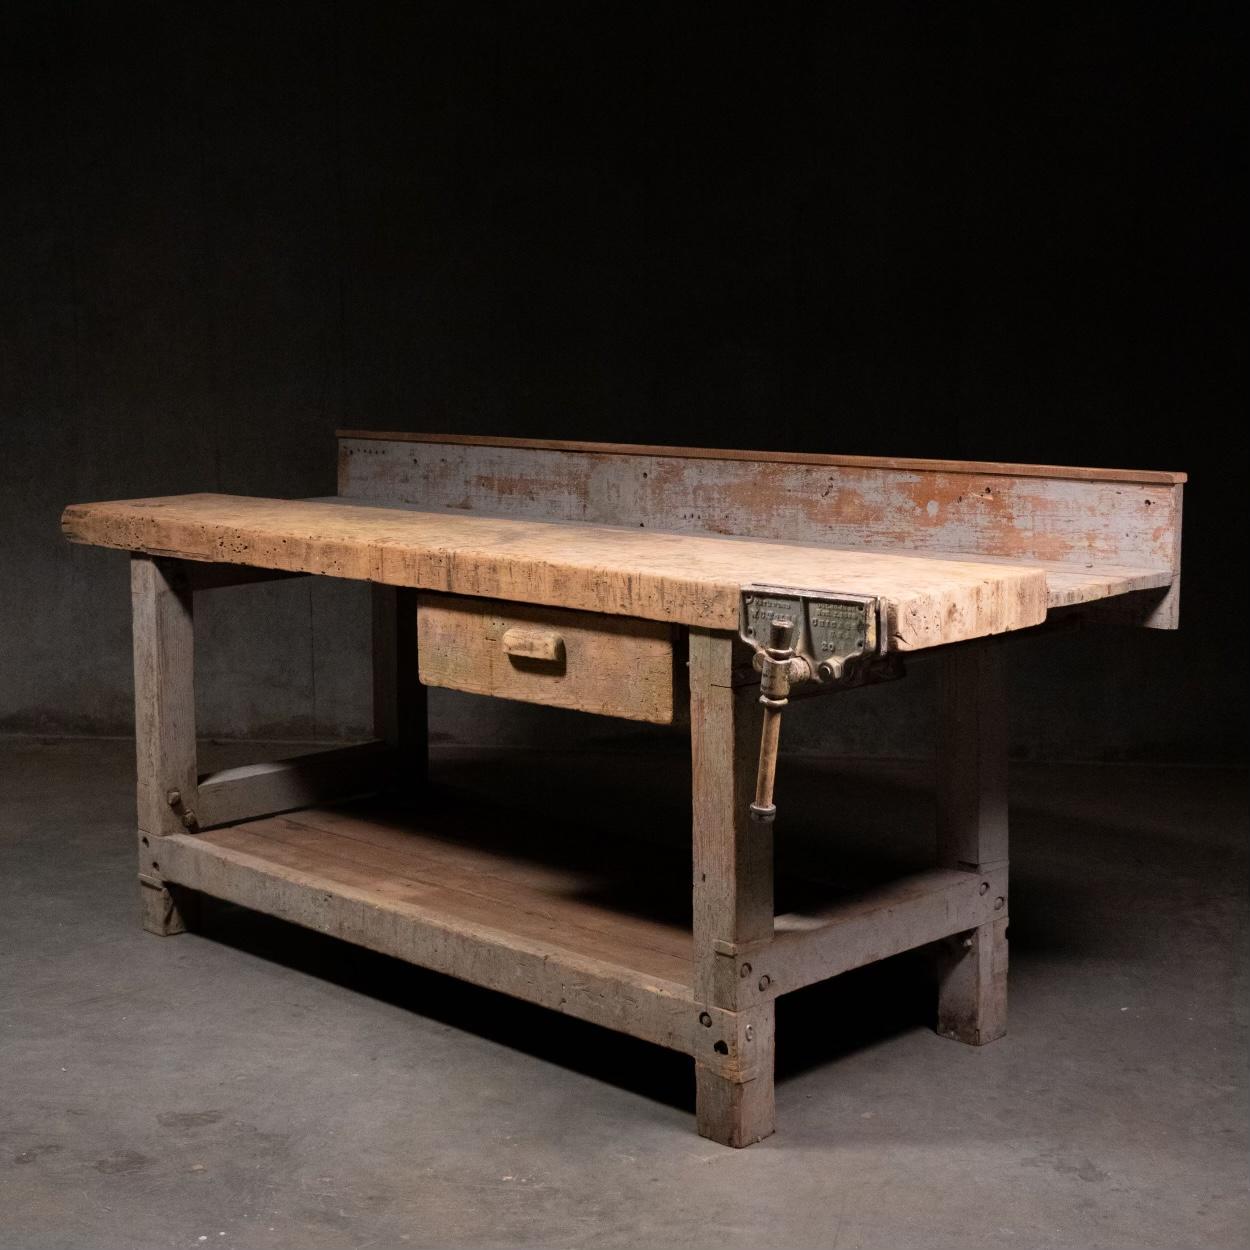 A very nice solid work bench in old worn painted grey finish. This piece was found in a factory outside Seattle. 
Restoration free this is a solid beautiful piece.